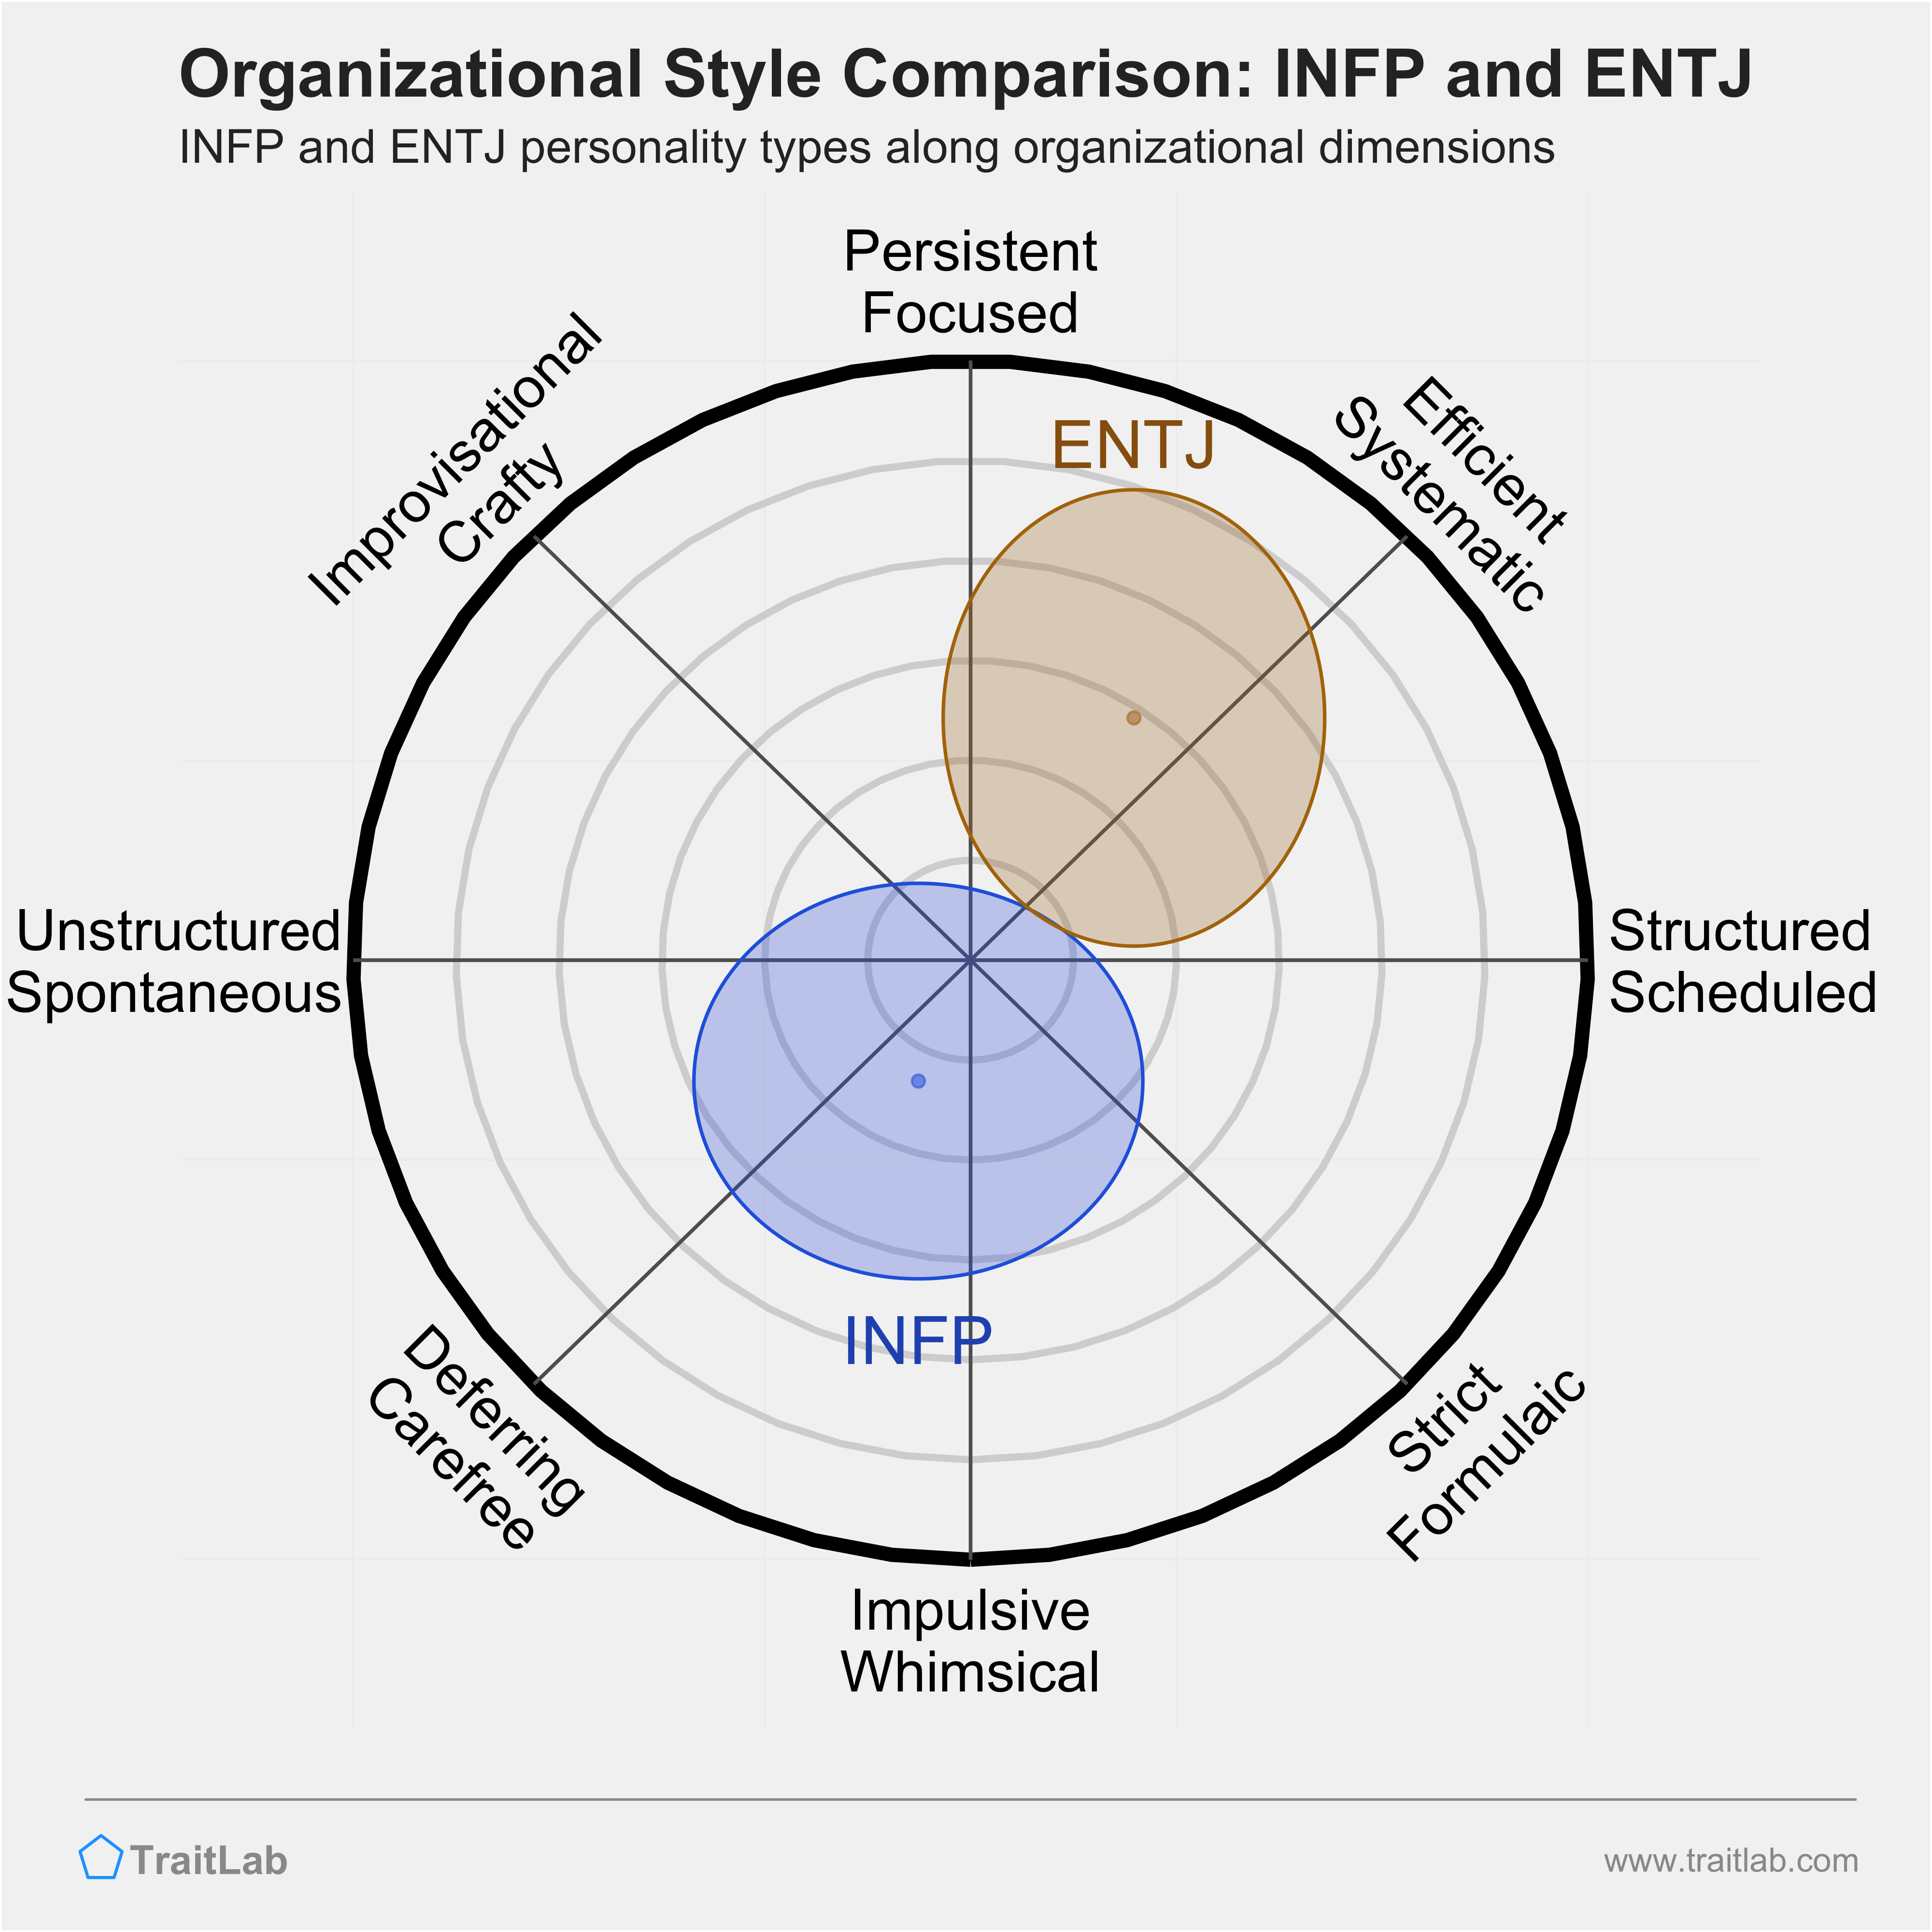 INFP and ENTJ comparison across organizational dimensions